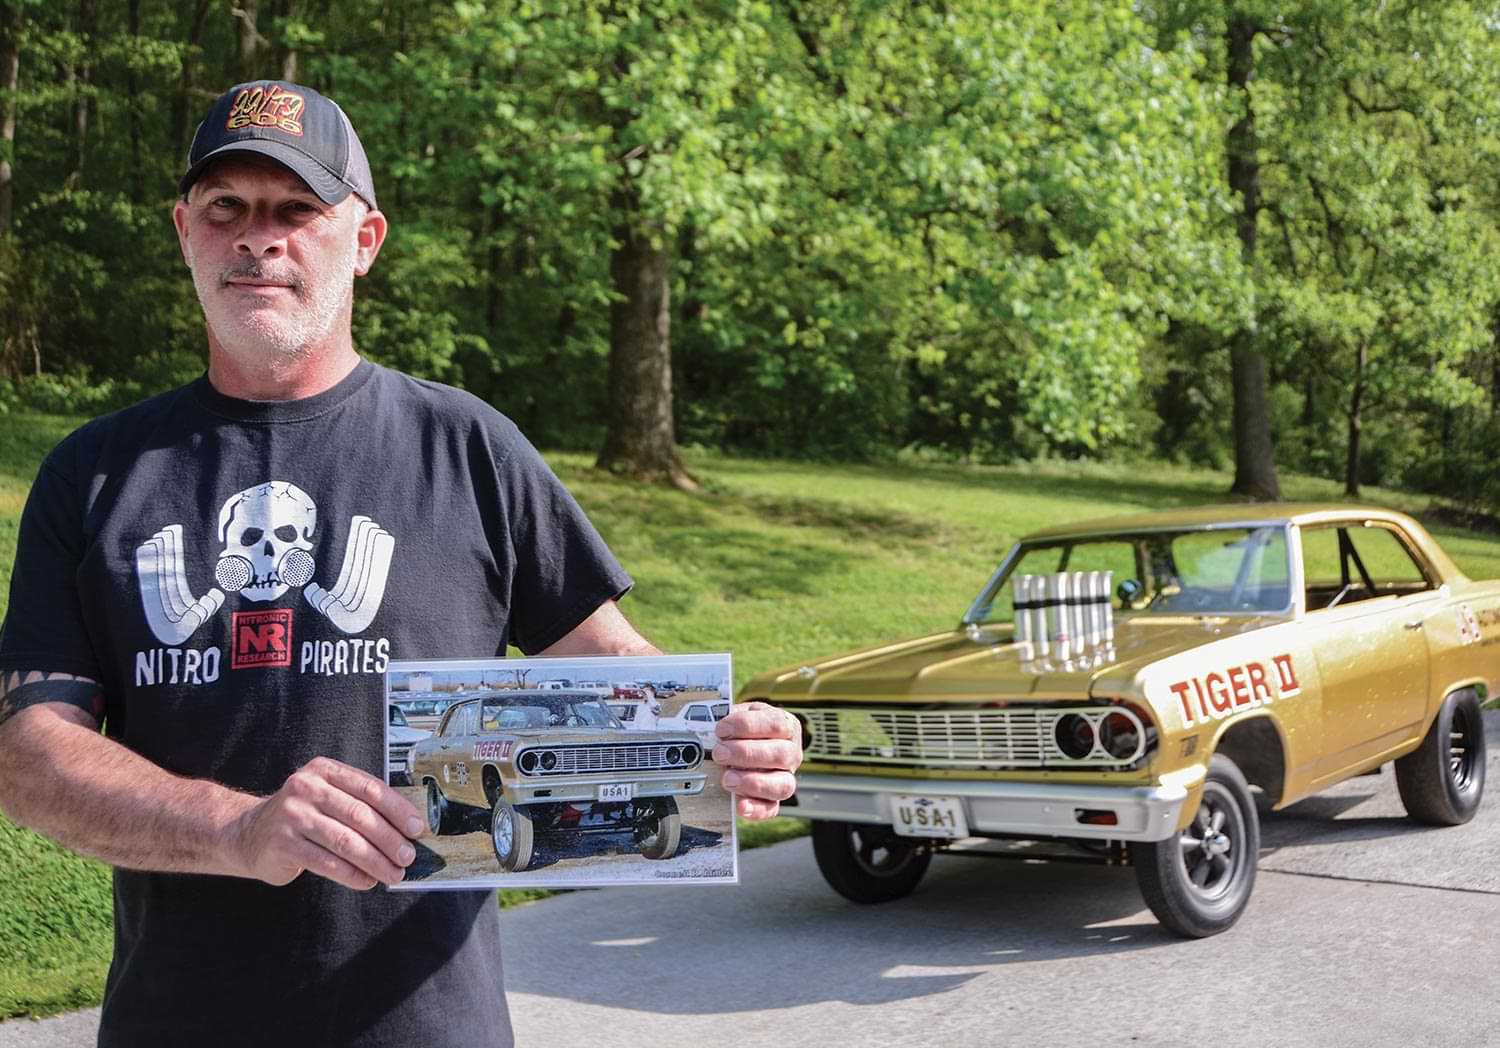 Dave Giles stands holding an image of the gold ’65 Chevelle 300, parked among other performance cars, while standing in front of the gold ’65 Chevelle 300